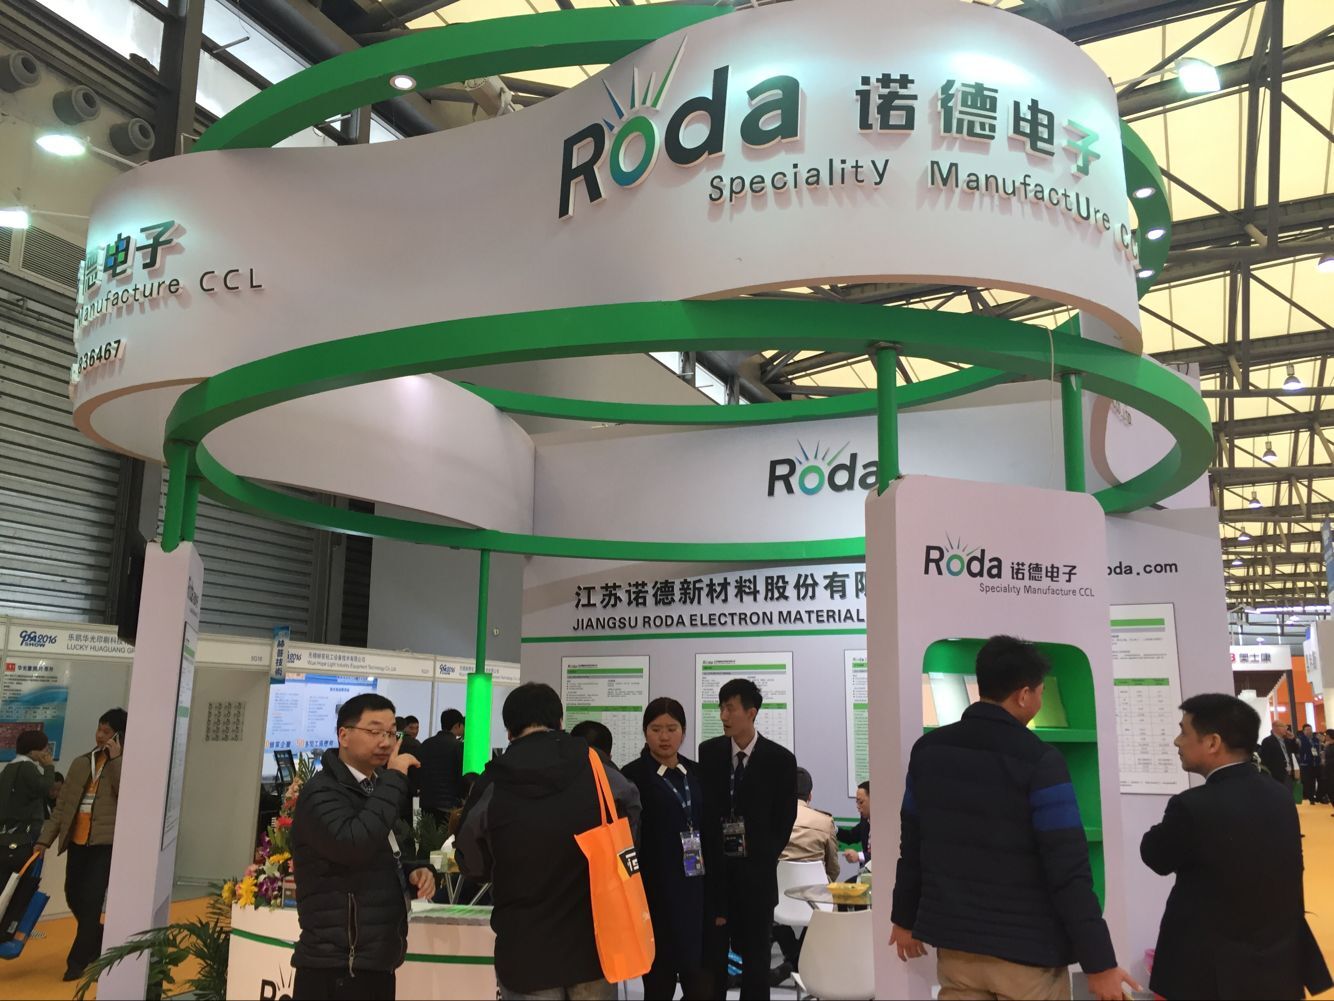 Review of Shanghai CPCA Exhibition in March 2016 